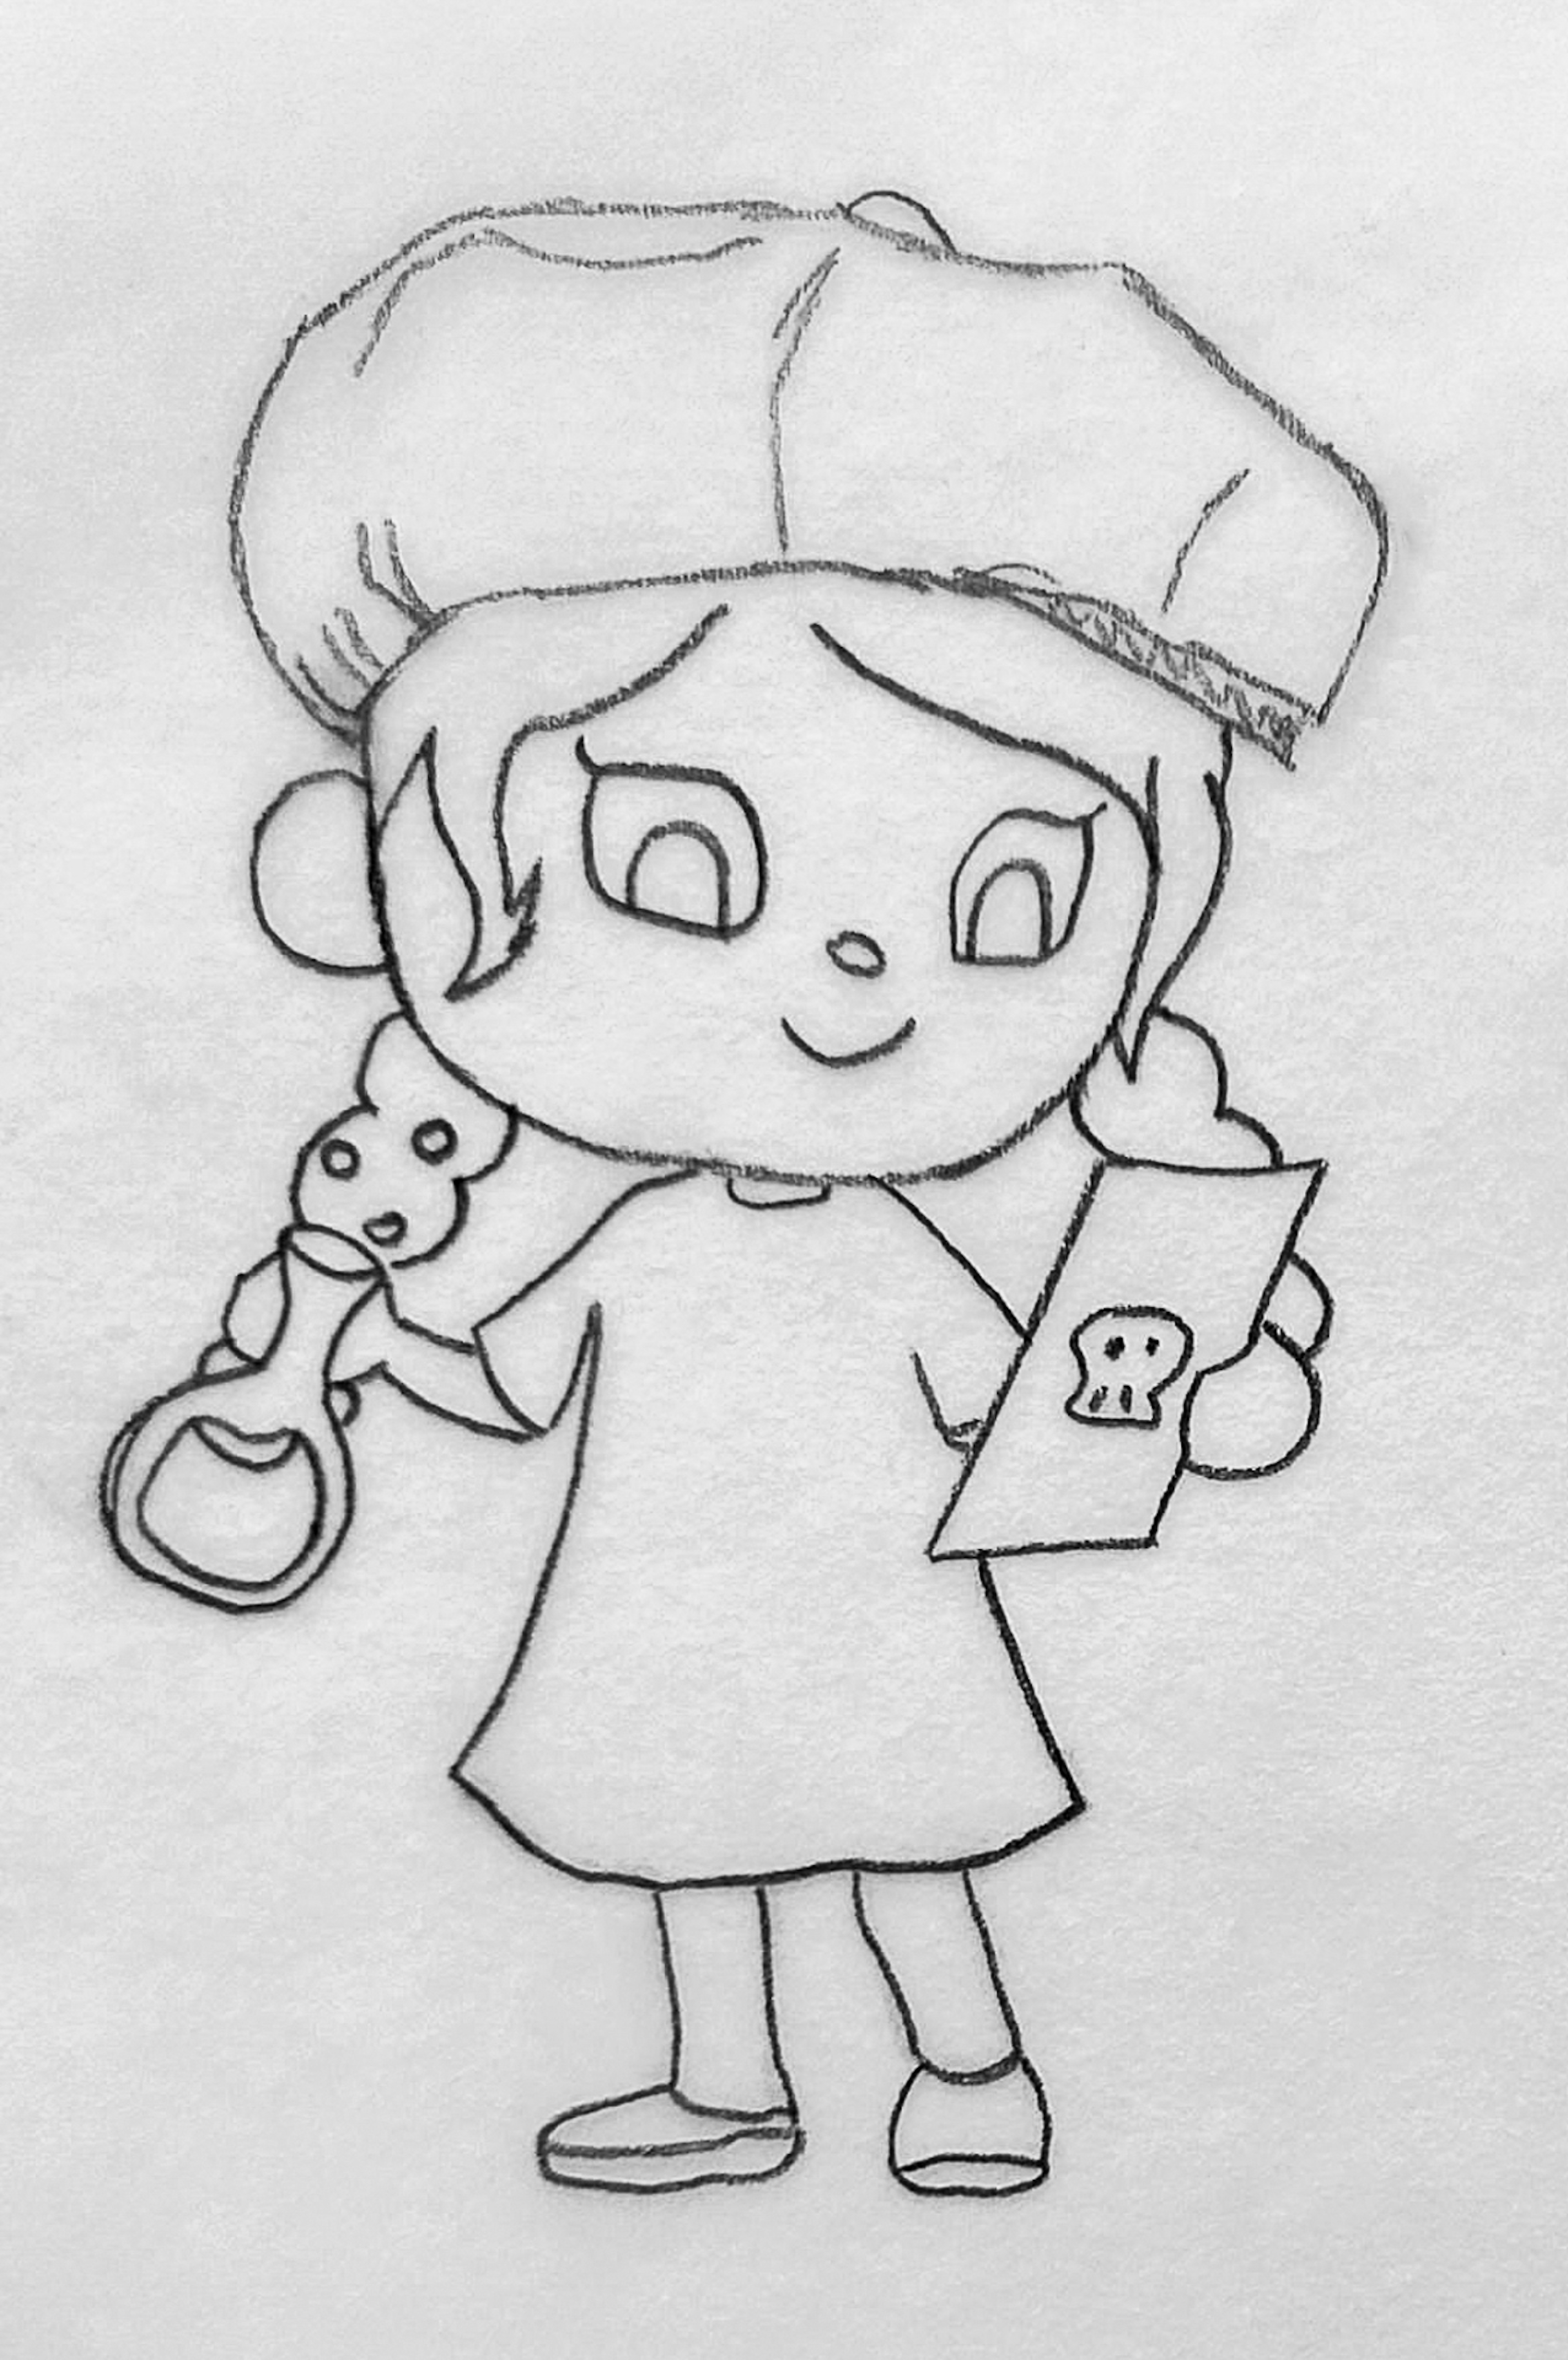 Final linework design of Alchemy Cookie in Animal Crossing Style. This rendition integrates key elements of her original cookie design (silhouette, beret and position beaker) into the aesthetic of Animal Crossing, ensuring an accurate portrayal of the character in this new style.